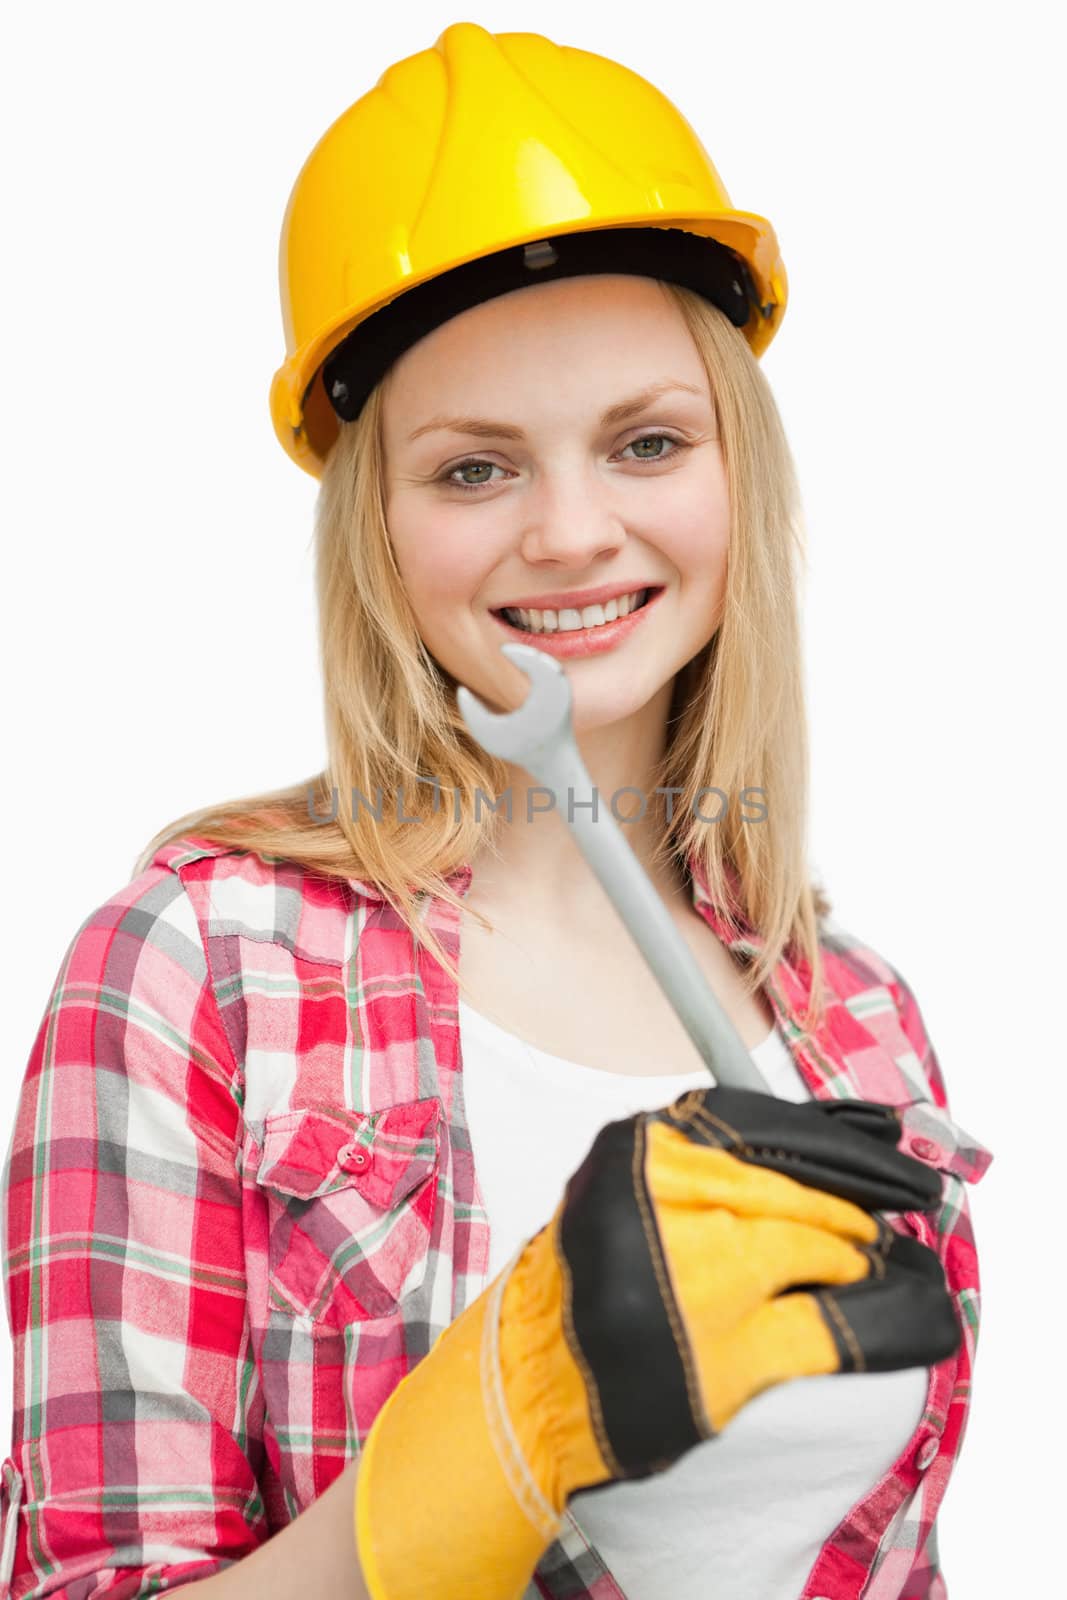 Woman holding a wrench while standing against white background